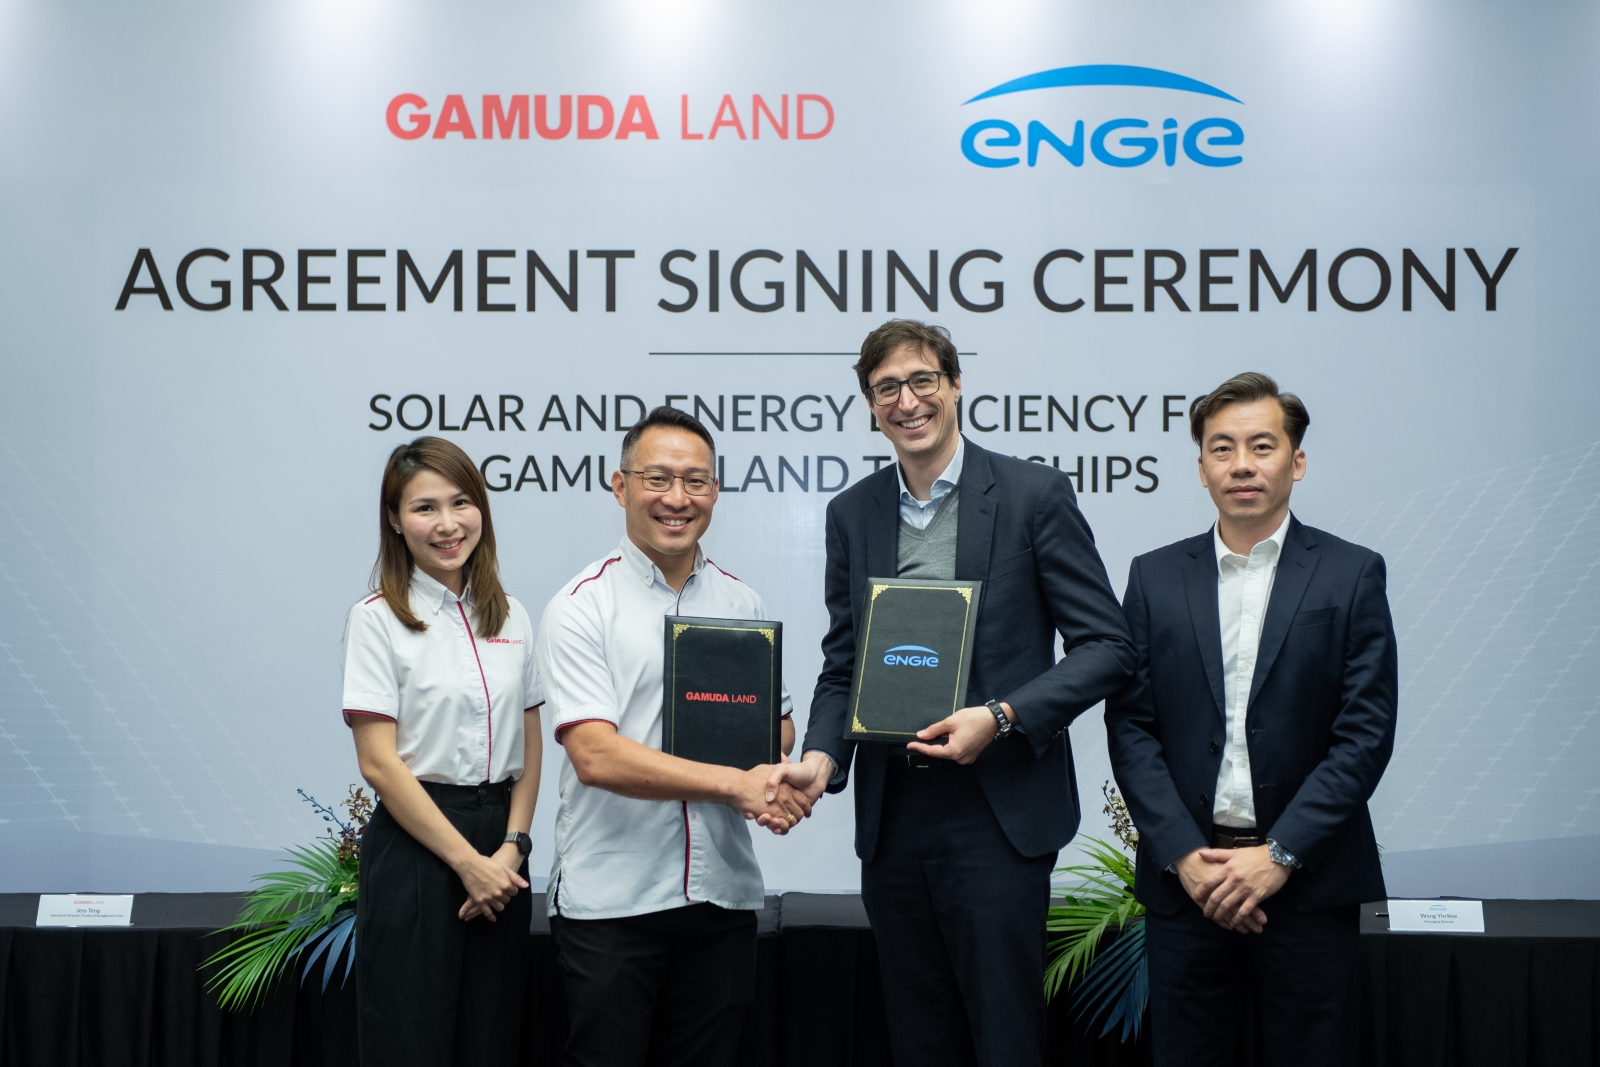 Left to right: Jess Teng Poh Fern, Chief Operating Officer, Gamuda Land; Chu Wai Lune, CEO, Gamuda Land; Thomas Baudlot, CEO of Energy Solutions APAC and Country Head for Southeast Asia, ENGIE South East Asia; Wong Yin Kee, Managing Director, ENGIE Services Malaysia 